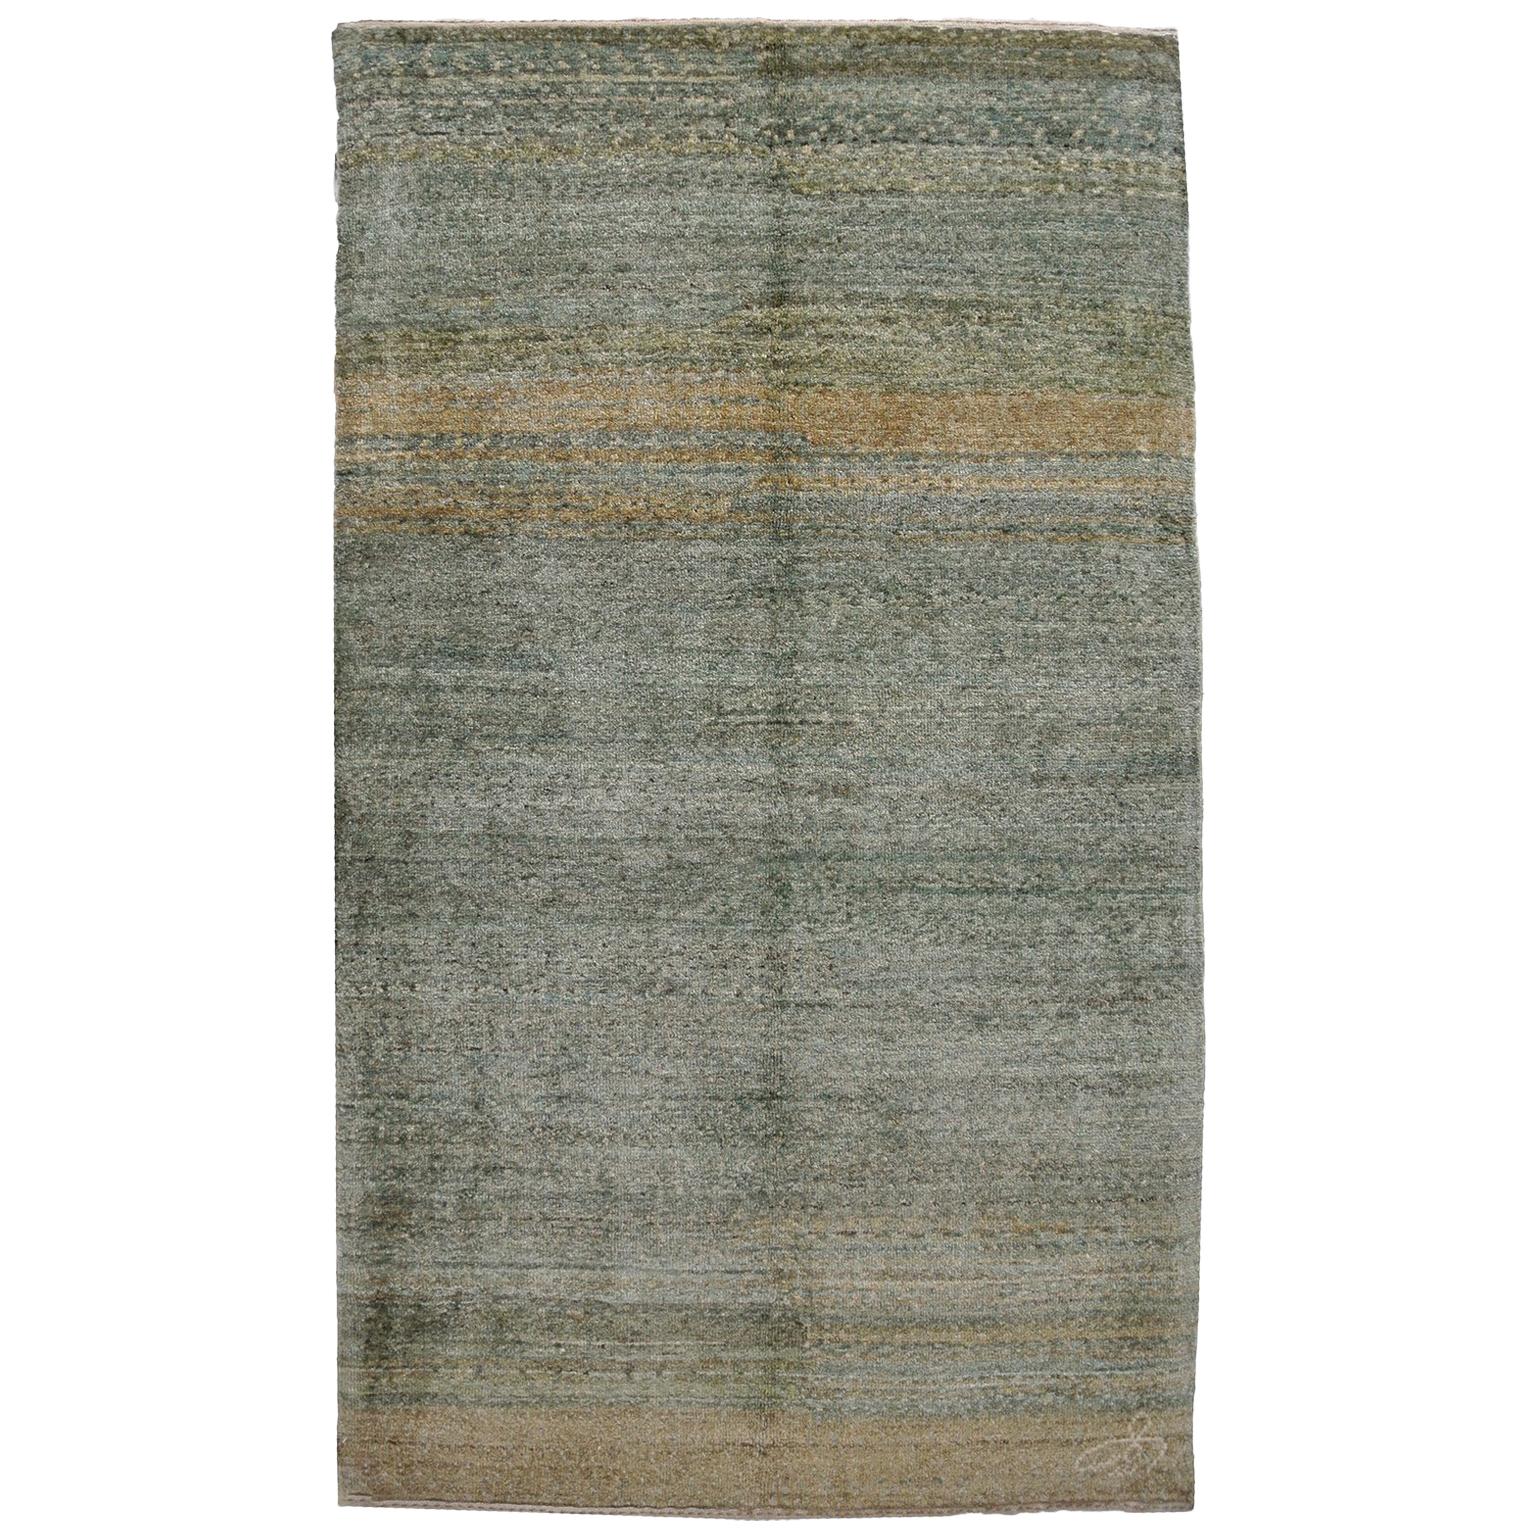 Orley Shabahang "Dissolve" Contemporary Persian Rug, 3' x 4' For Sale